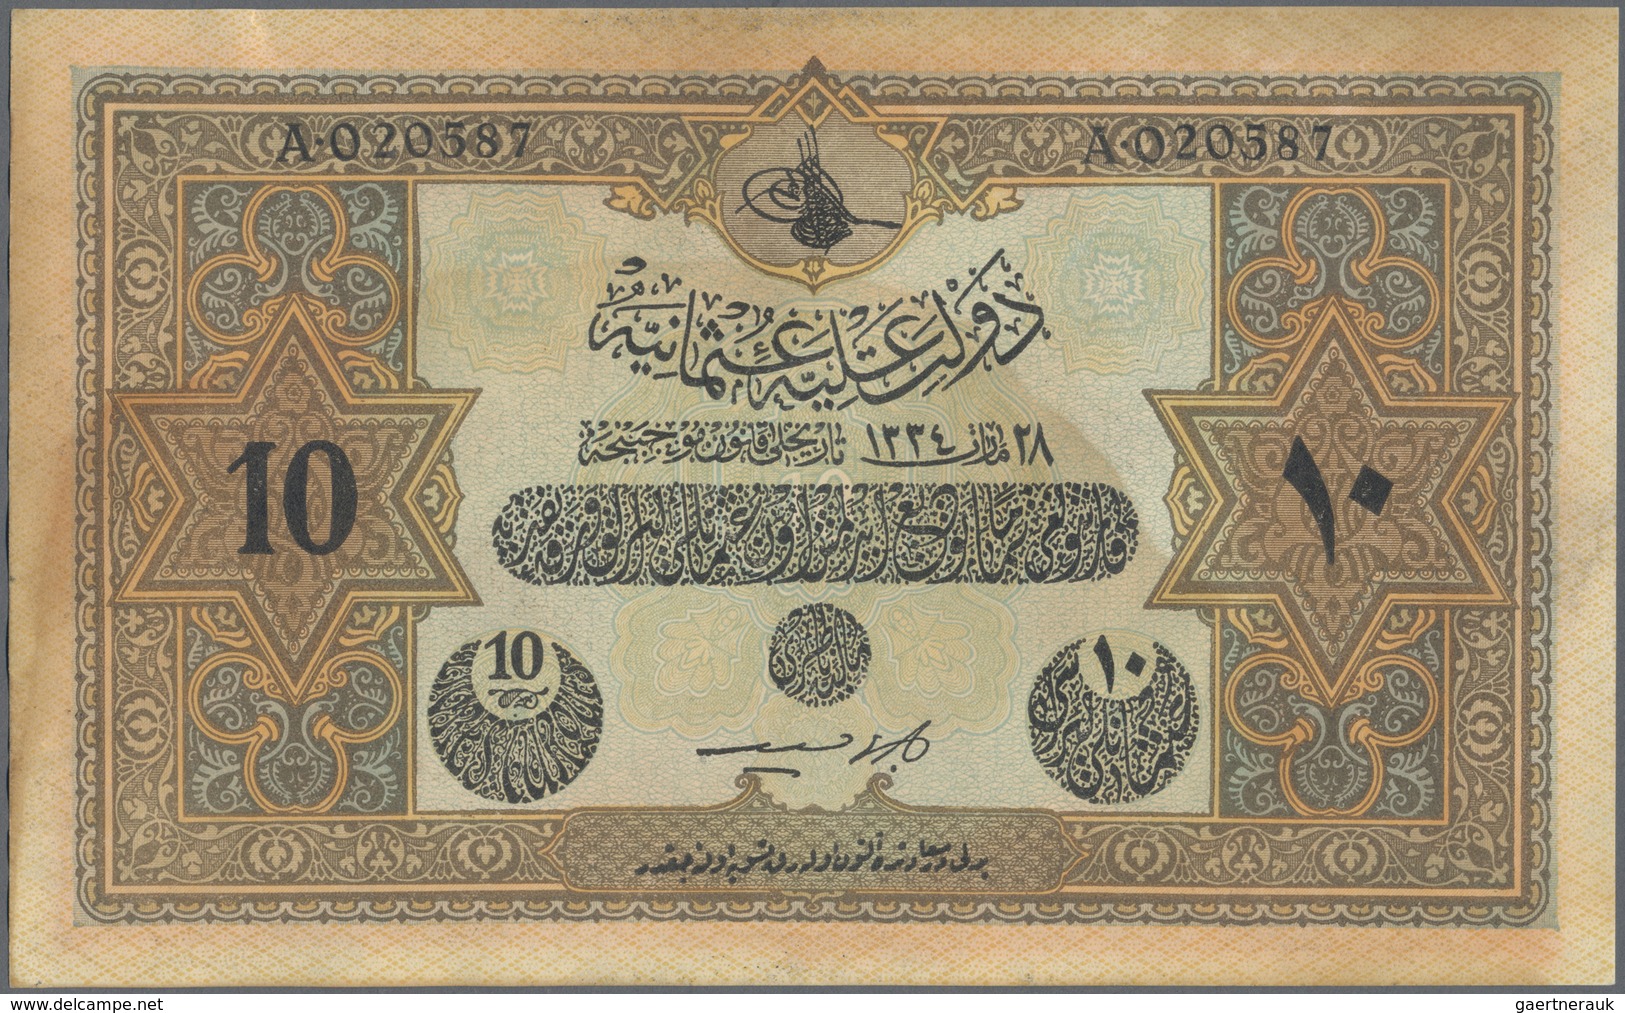 Turkey / Türkei: 10 Livres Turques AH1334 (1918) Contemporary Forgery Without Watermark And Stamp: D - Turkey